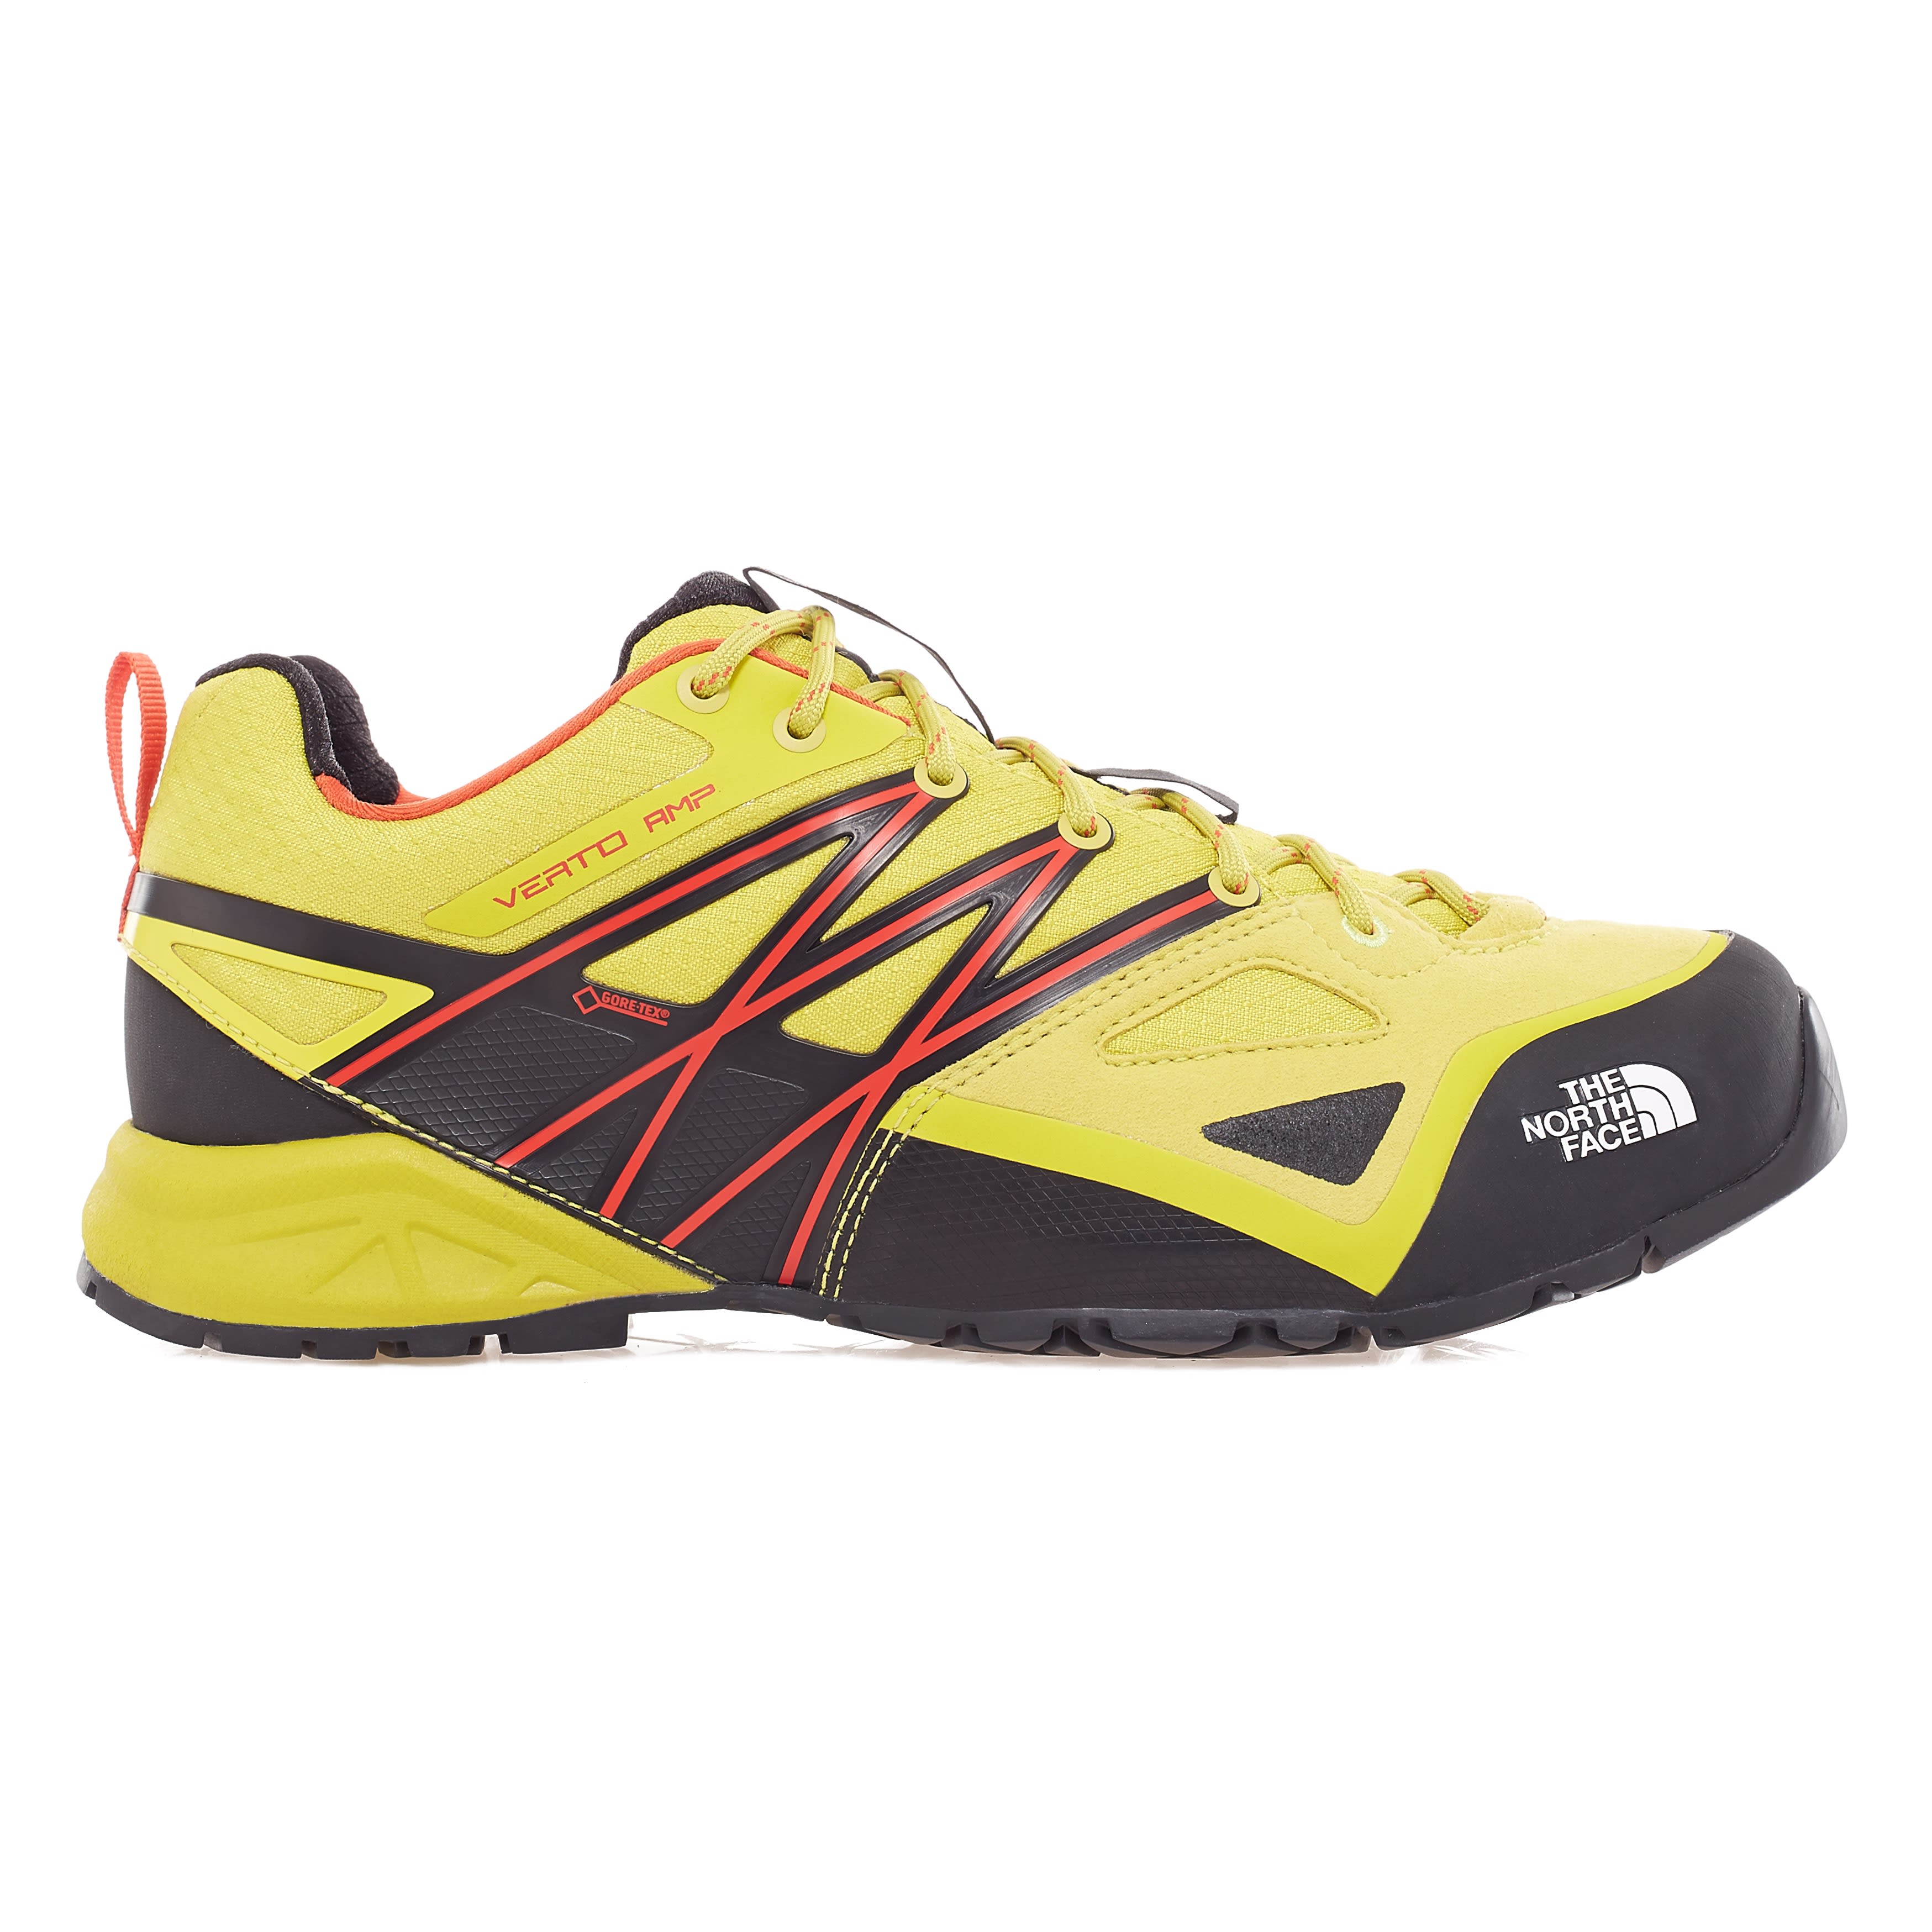 the north face verto amp gtx Online 